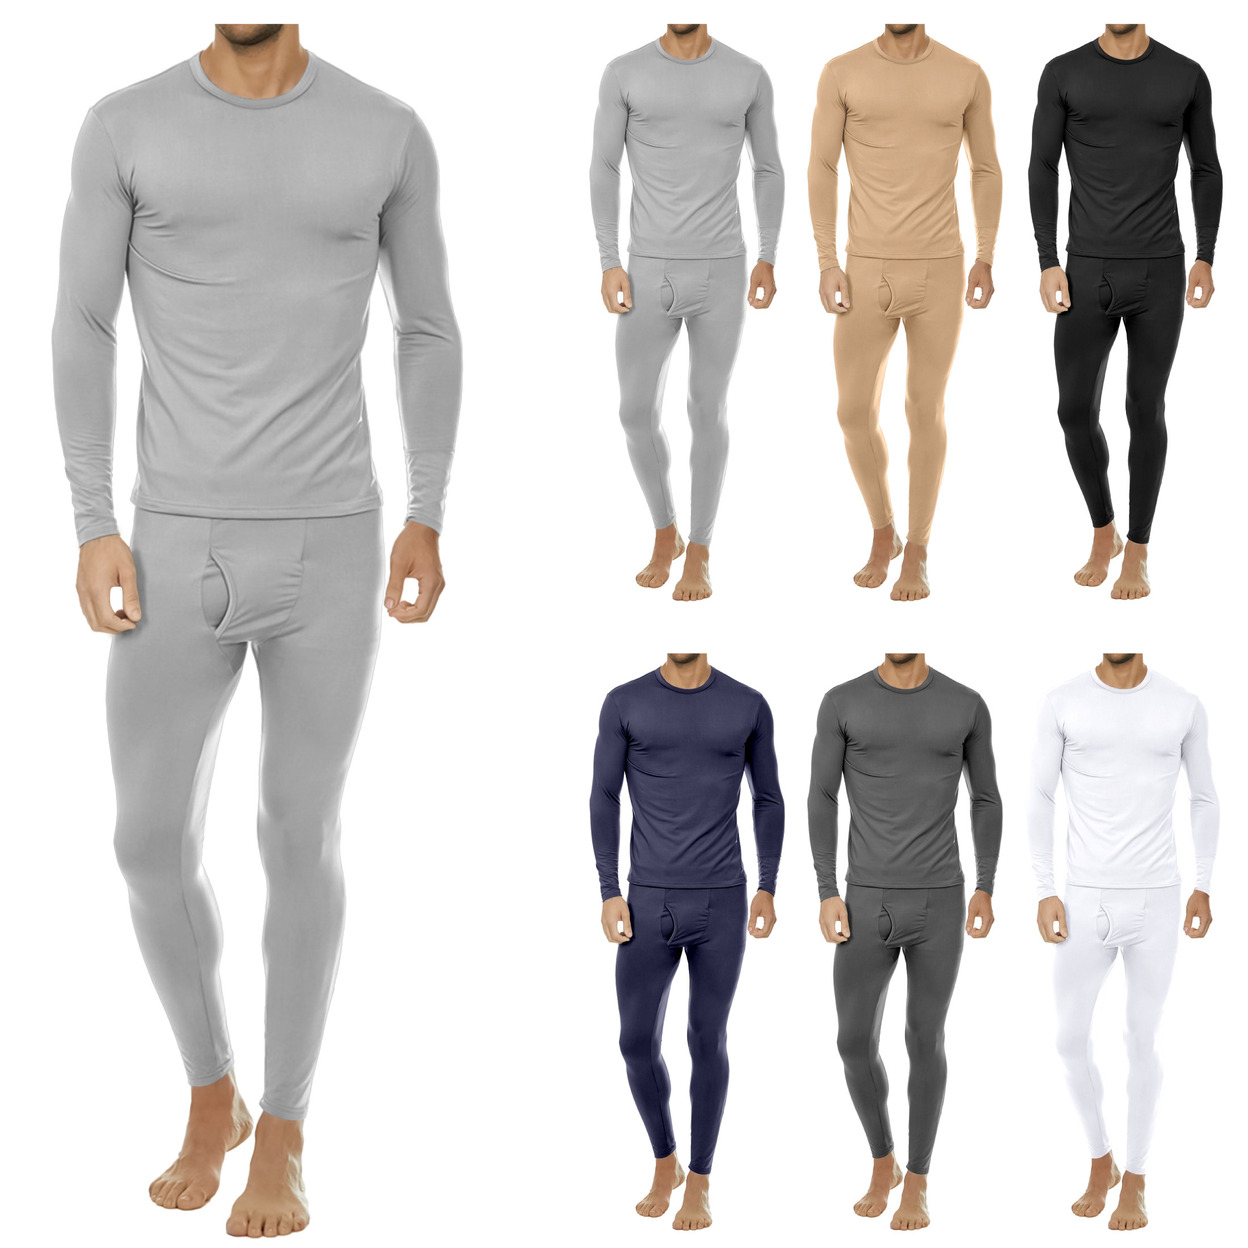 2-Sets: Men's Winter Warm Fleece Lined Thermal Underwear Set For Cold Weather - Grey&white, Small